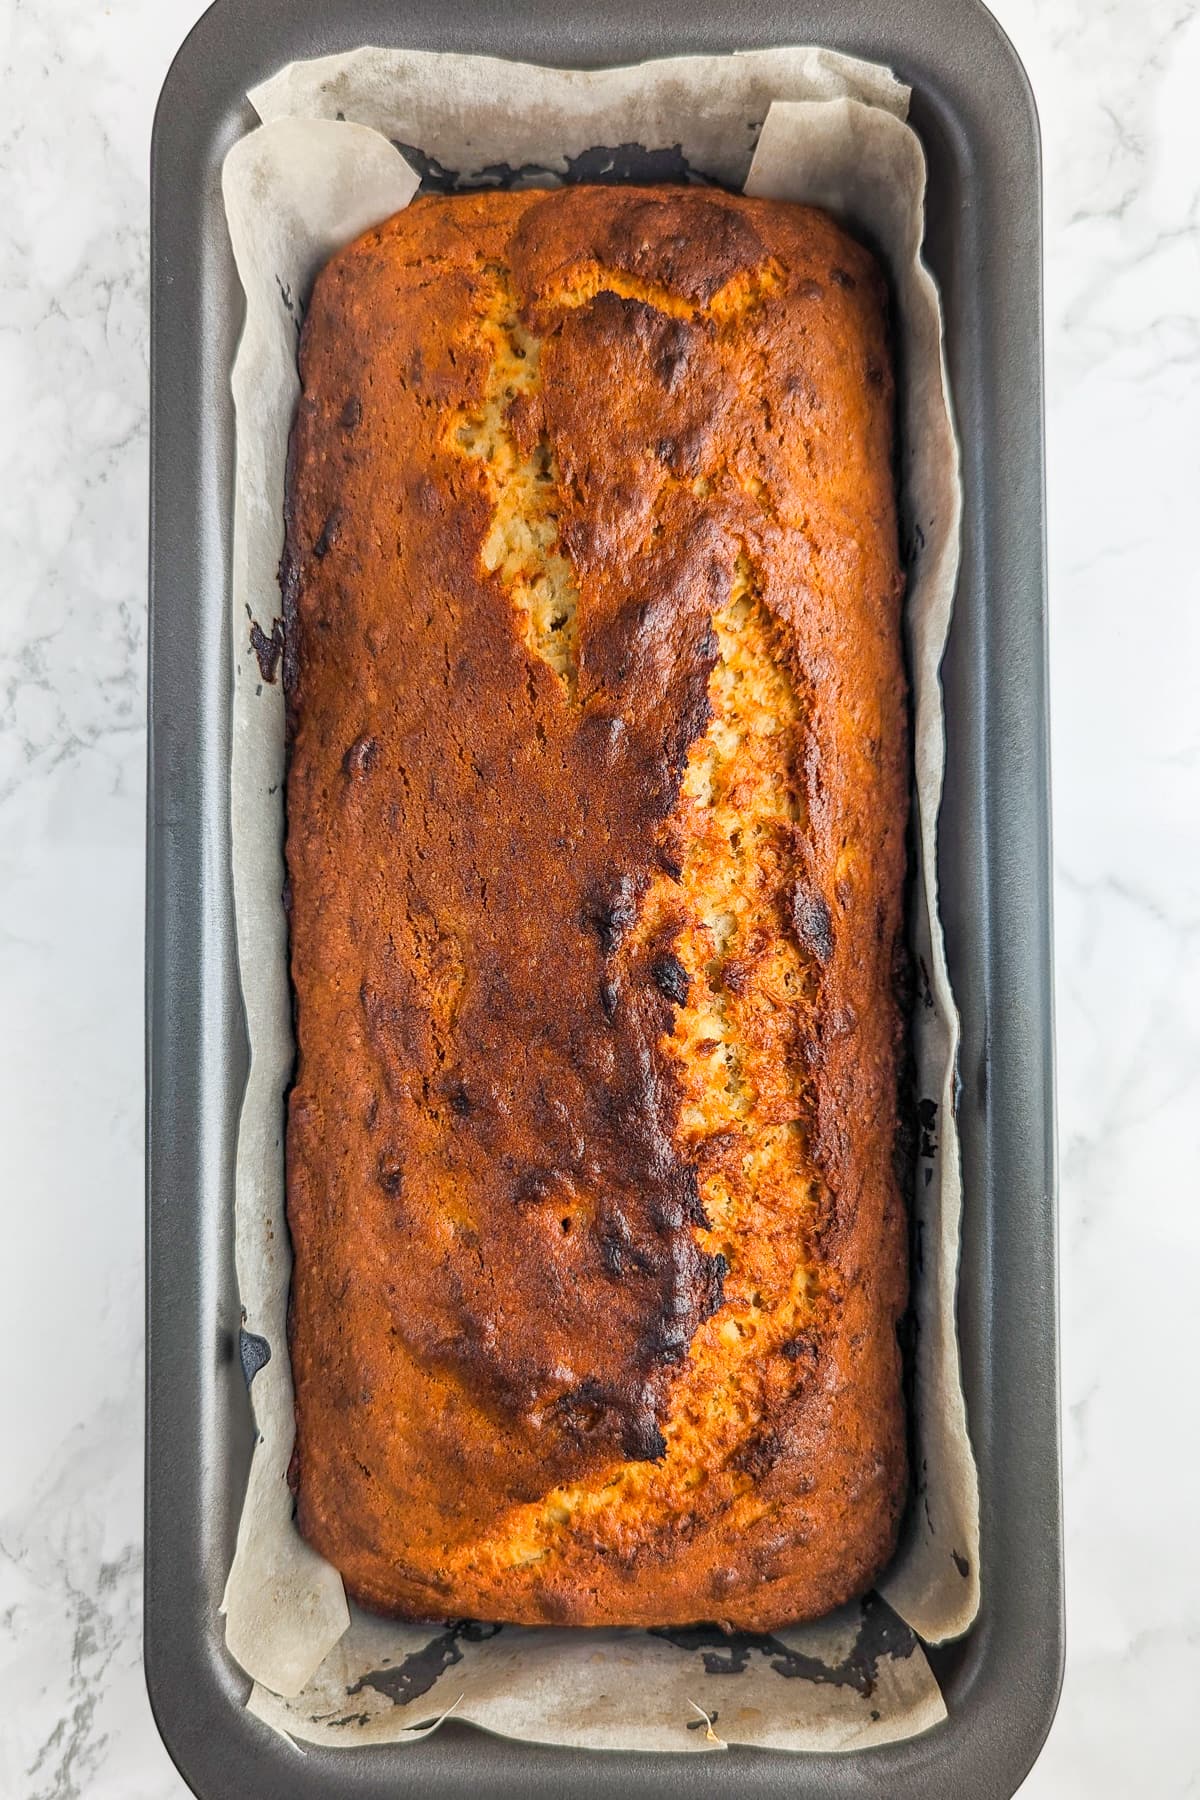 Gray metal cake pan with banana bread inside on a white marble surface.